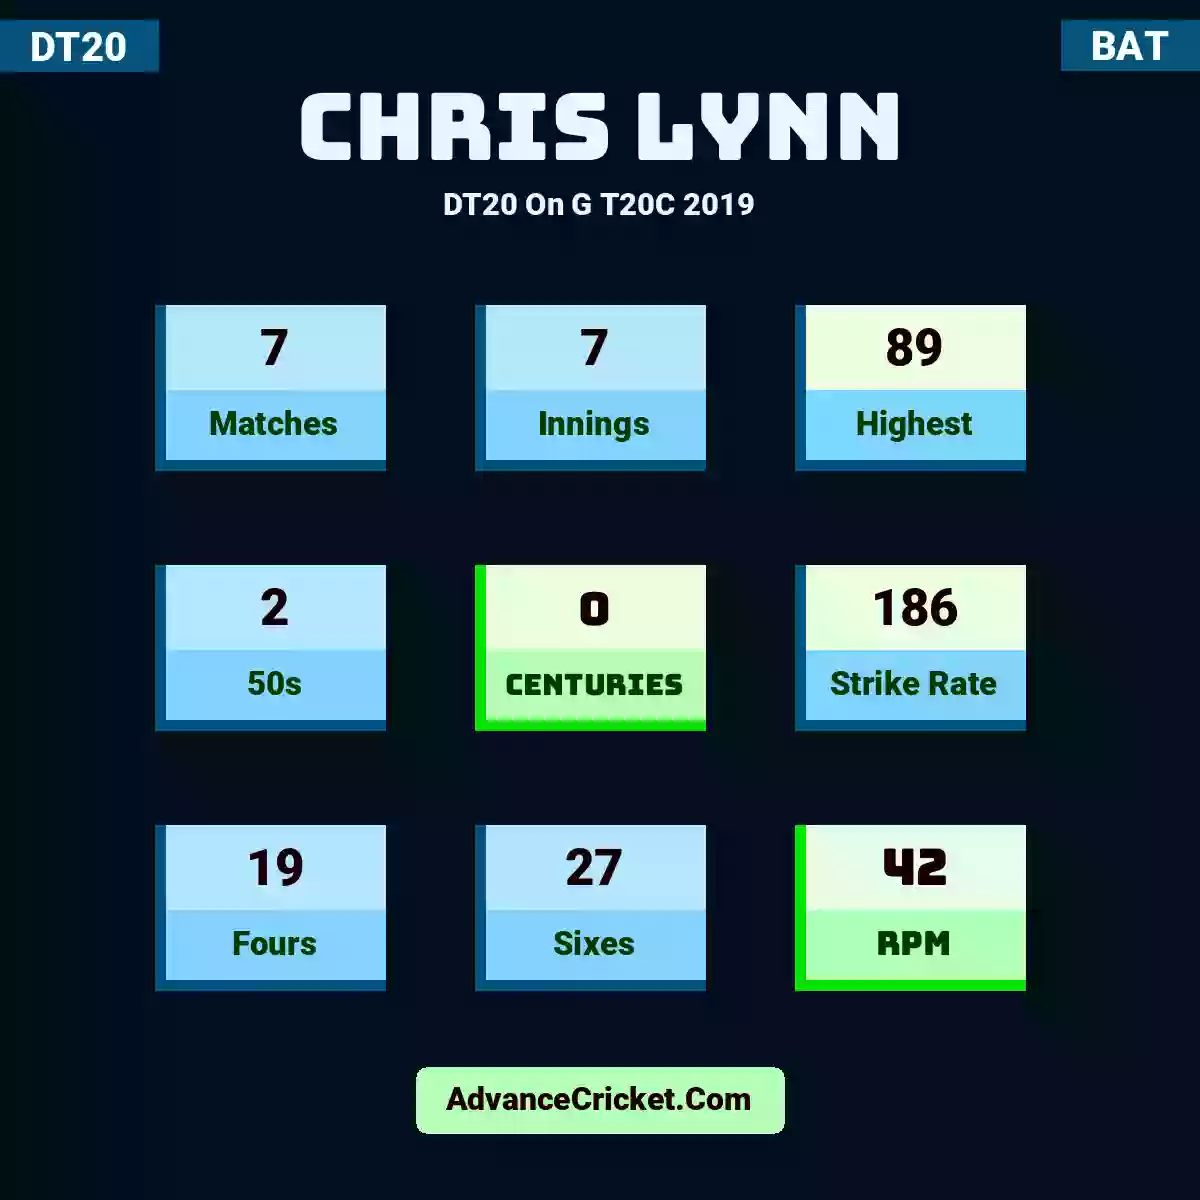 Chris Lynn DT20  On G T20C 2019, Chris Lynn played 7 matches, scored 89 runs as highest, 2 half-centuries, and 0 centuries, with a strike rate of 186. C.Lynn hit 19 fours and 27 sixes, with an RPM of 42.